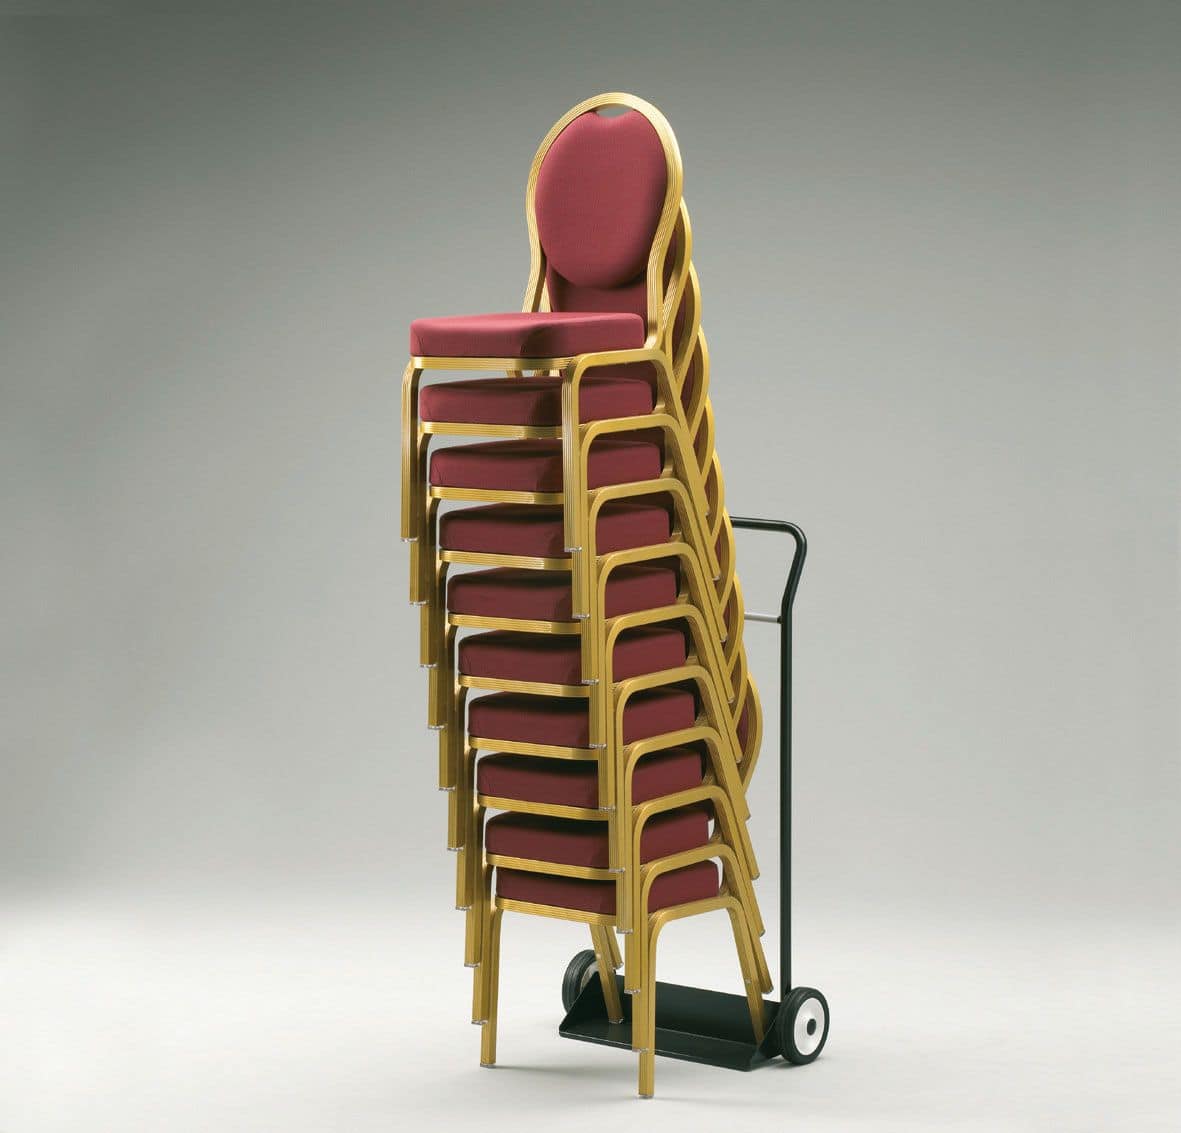 Como 65/4, Chair for banquet, conference and meeting rooms in hotels